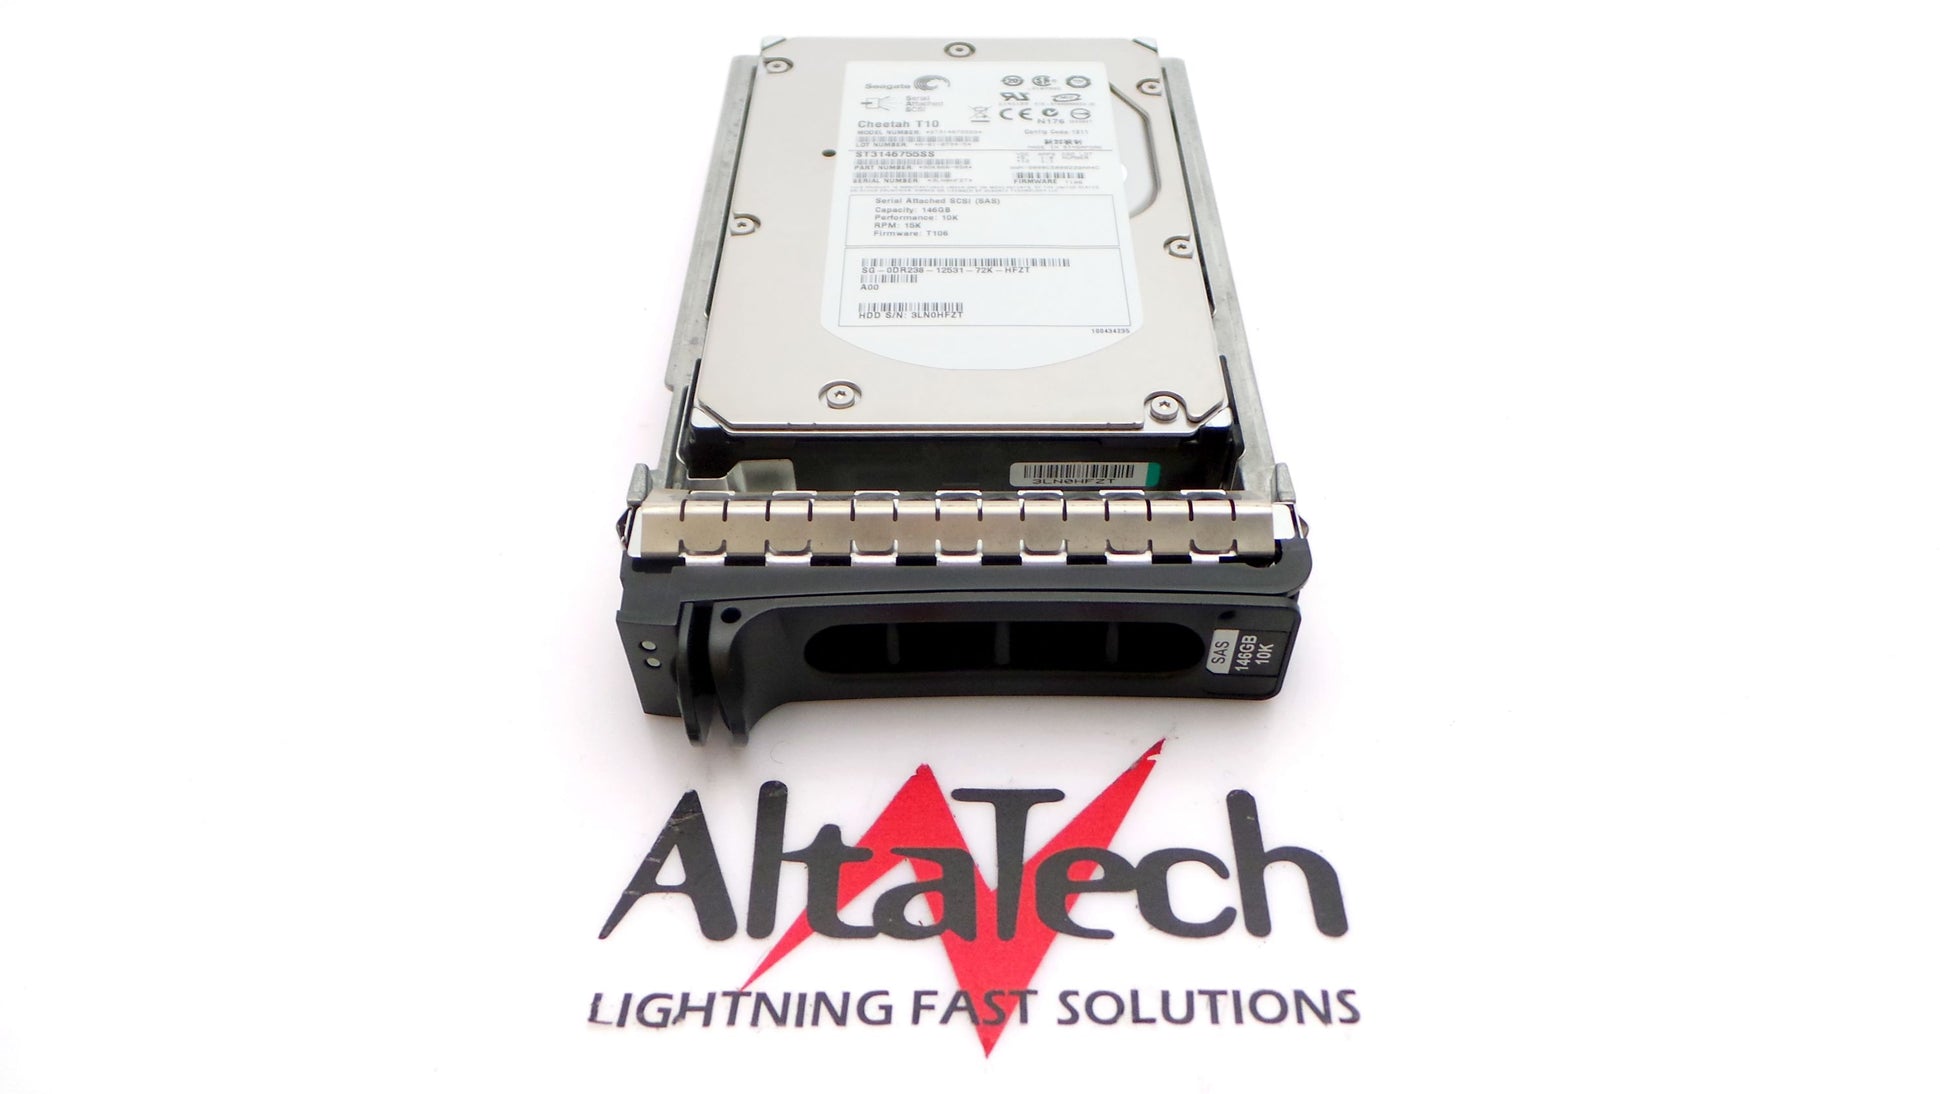 Dell DR238 146GB SAS LFF Hard Disk Drive for PE2950, Used